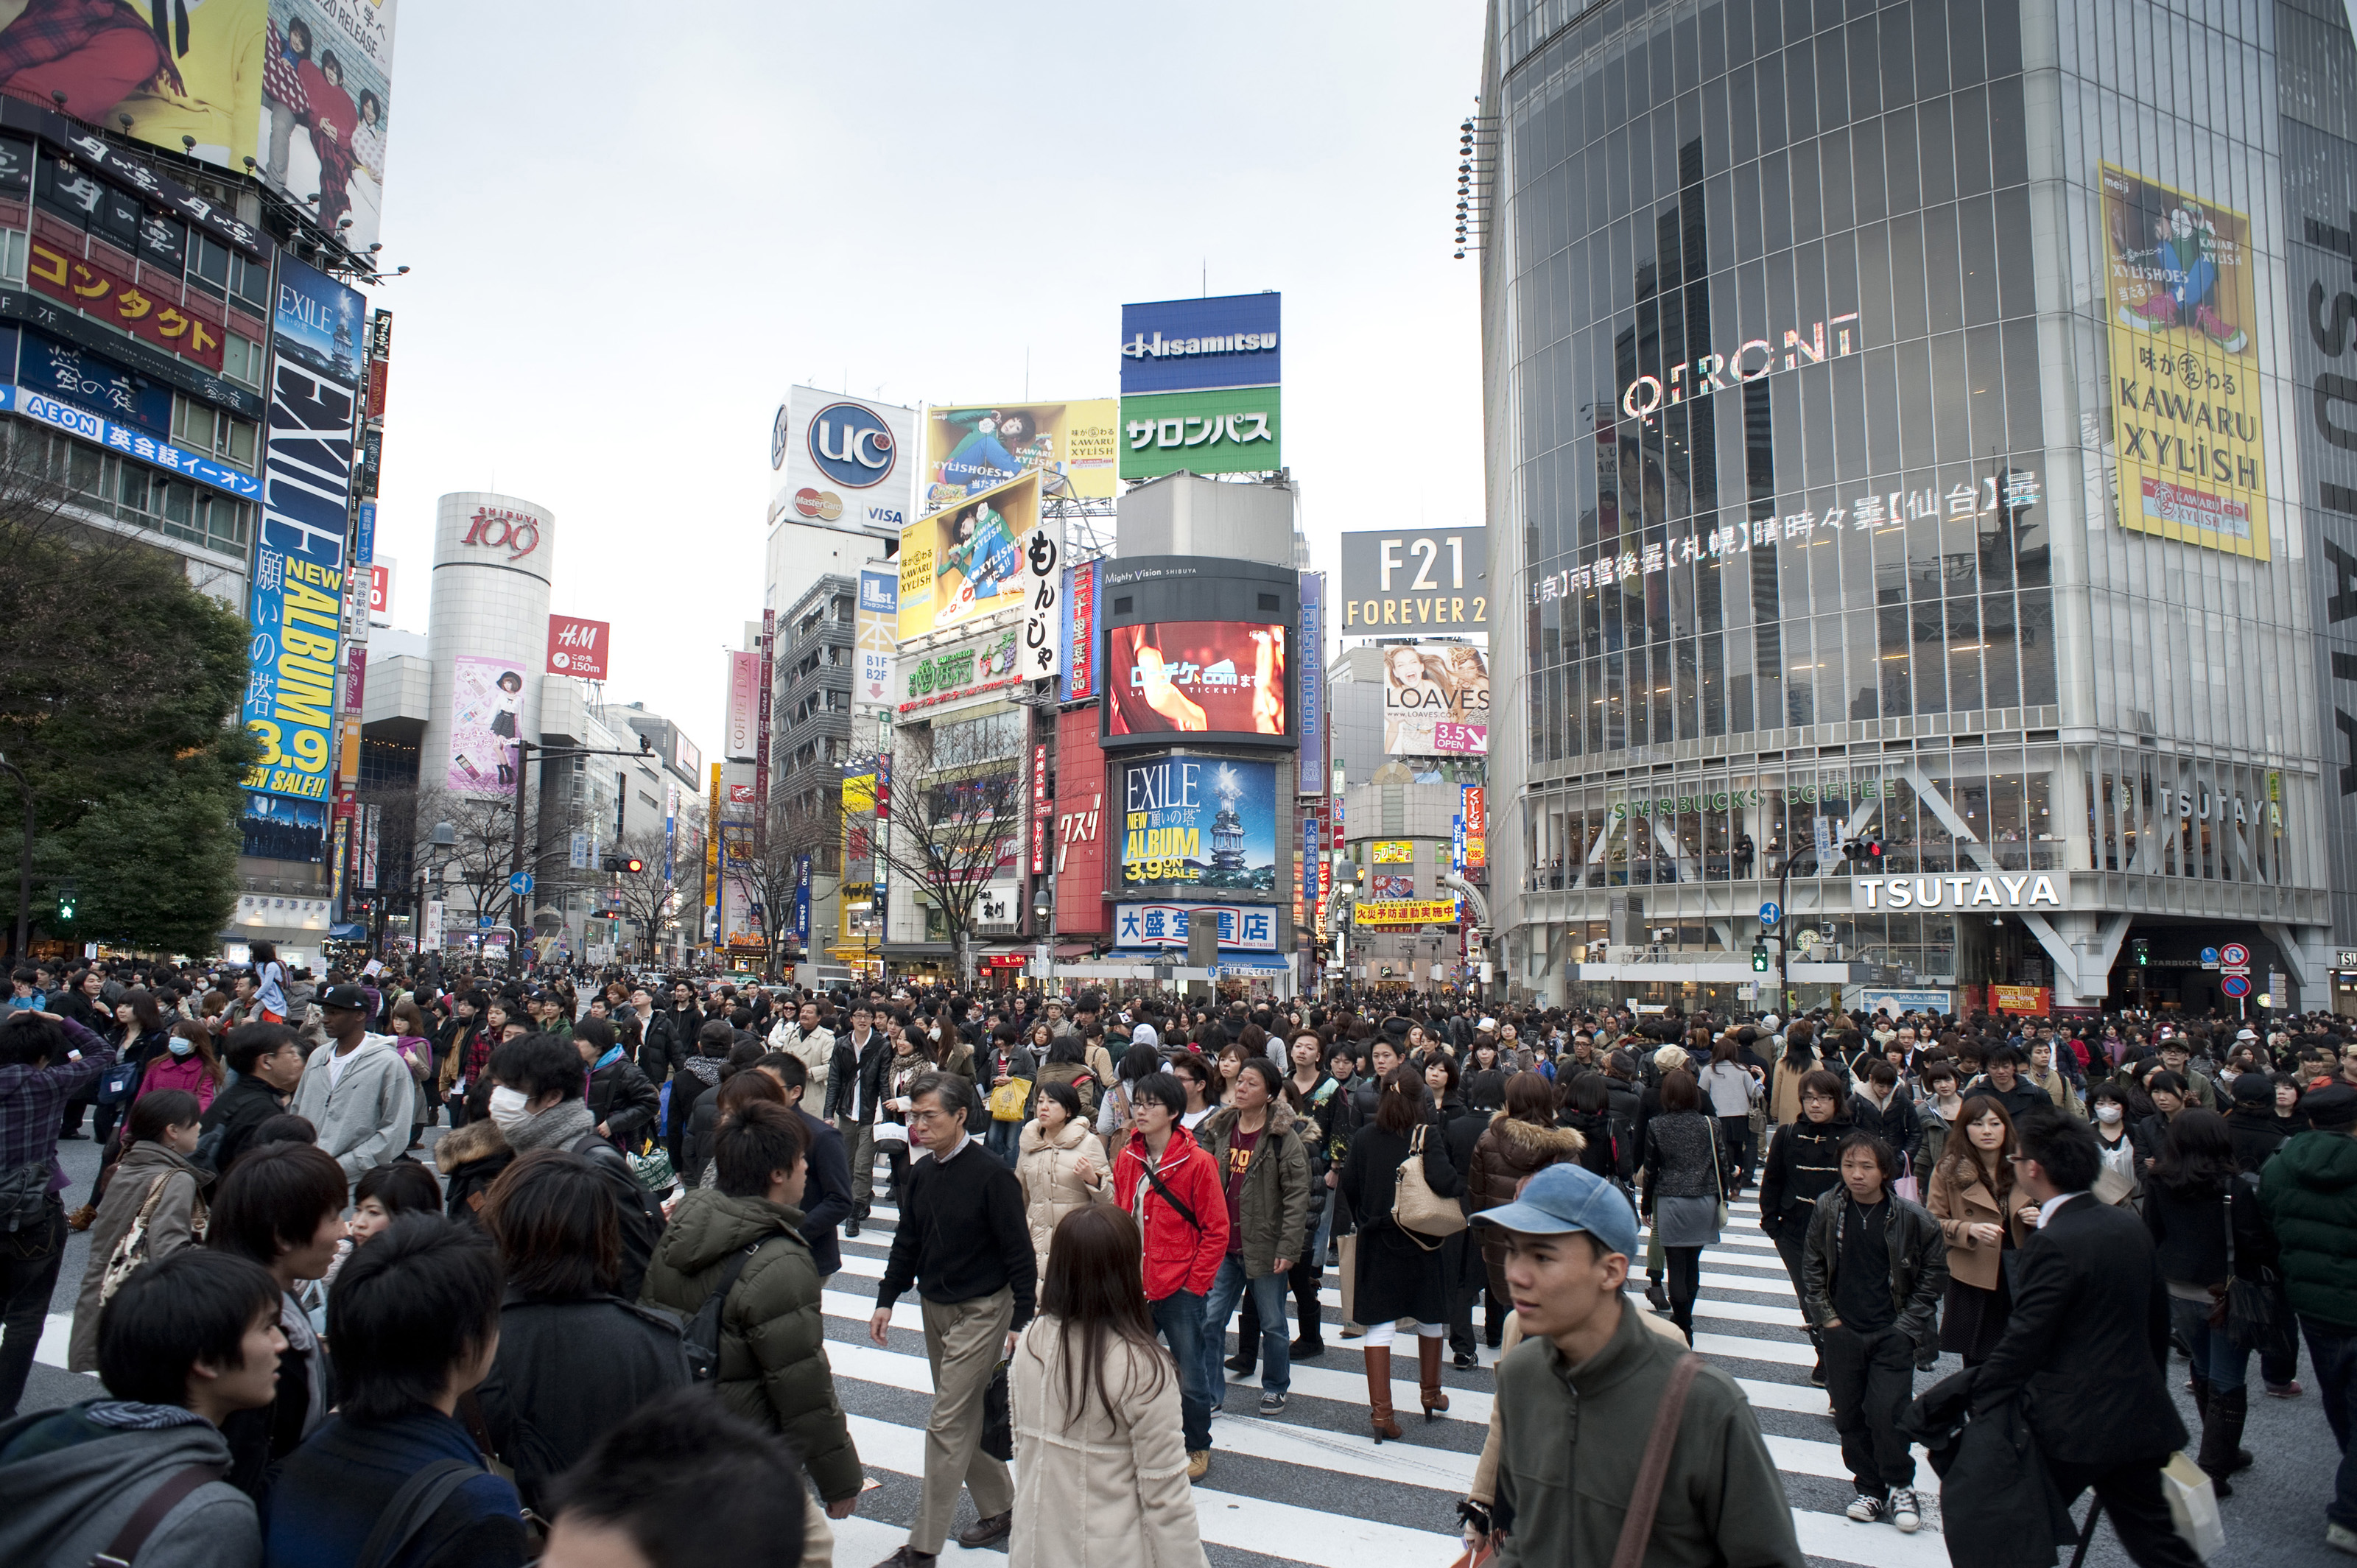 GDP Growth in Japan due to Bitcoin price rally – KiTTCoin